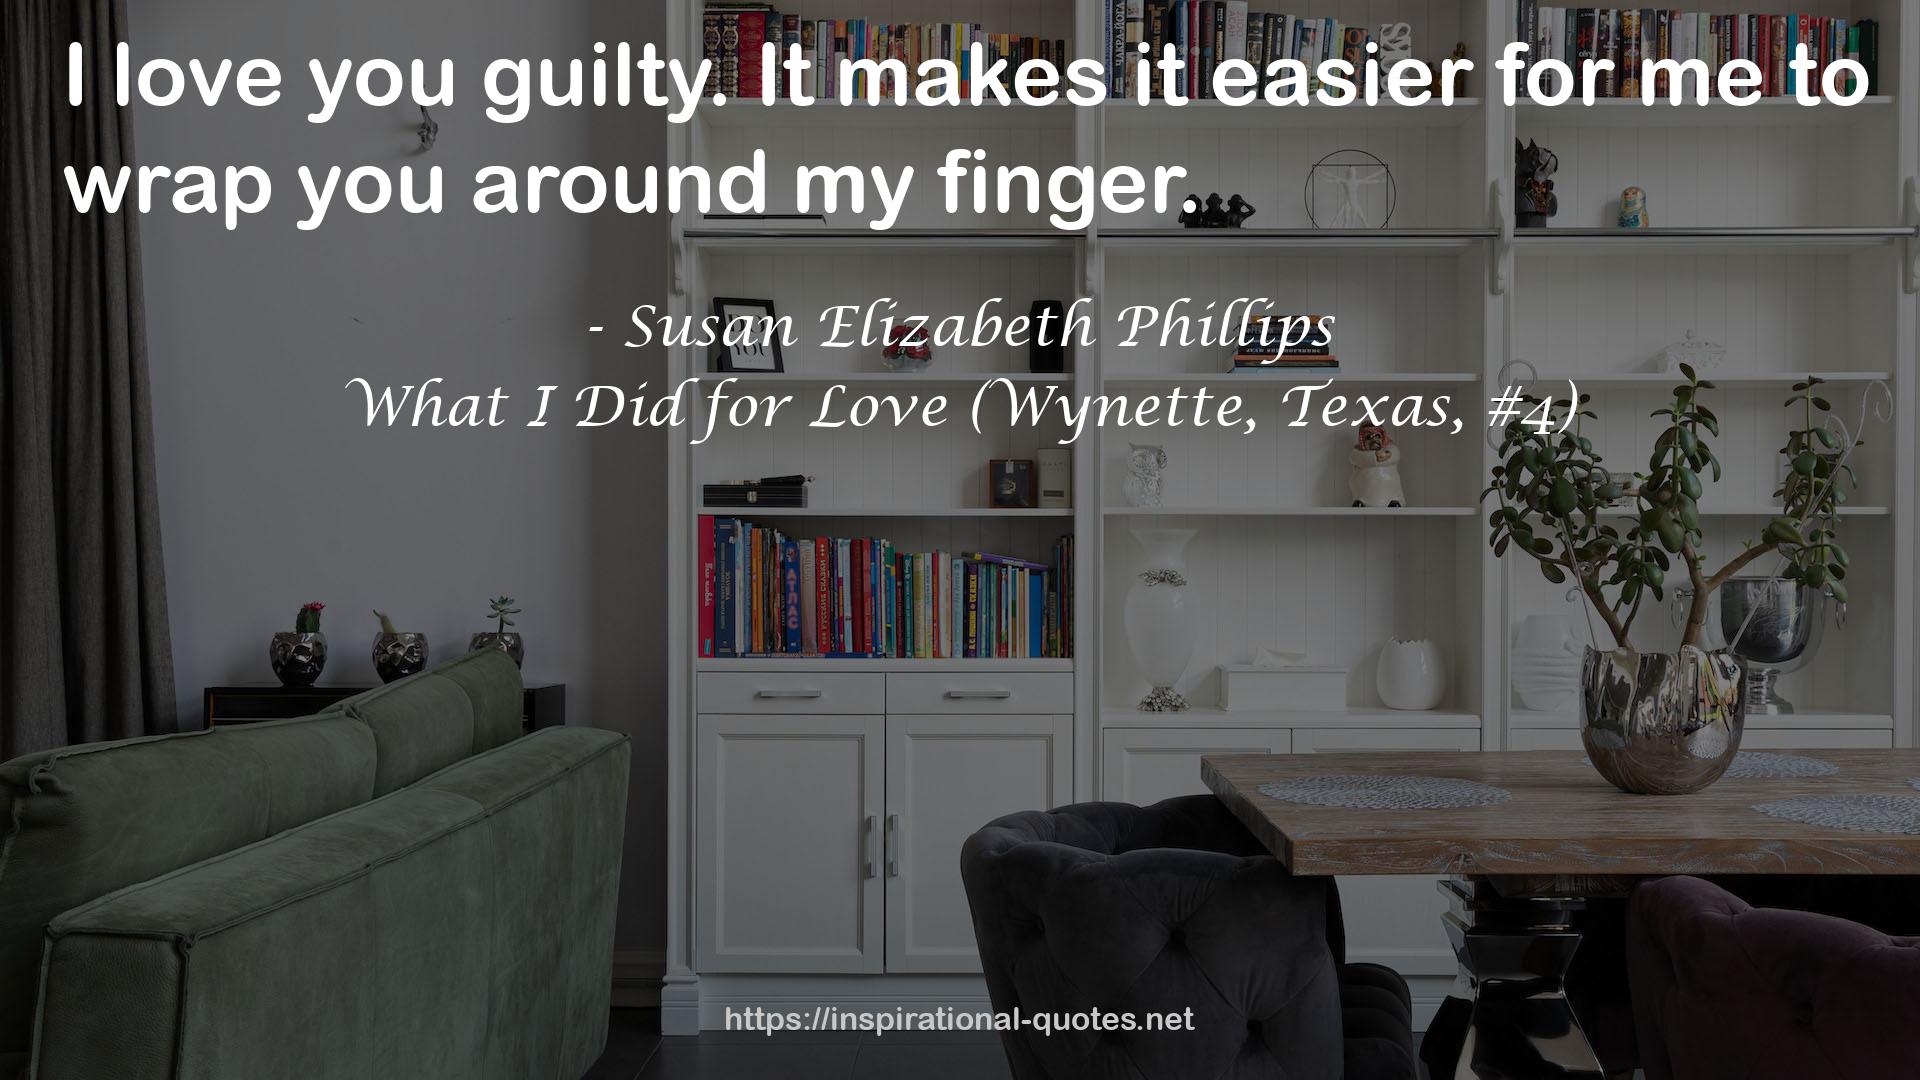 What I Did for Love (Wynette, Texas, #4) QUOTES